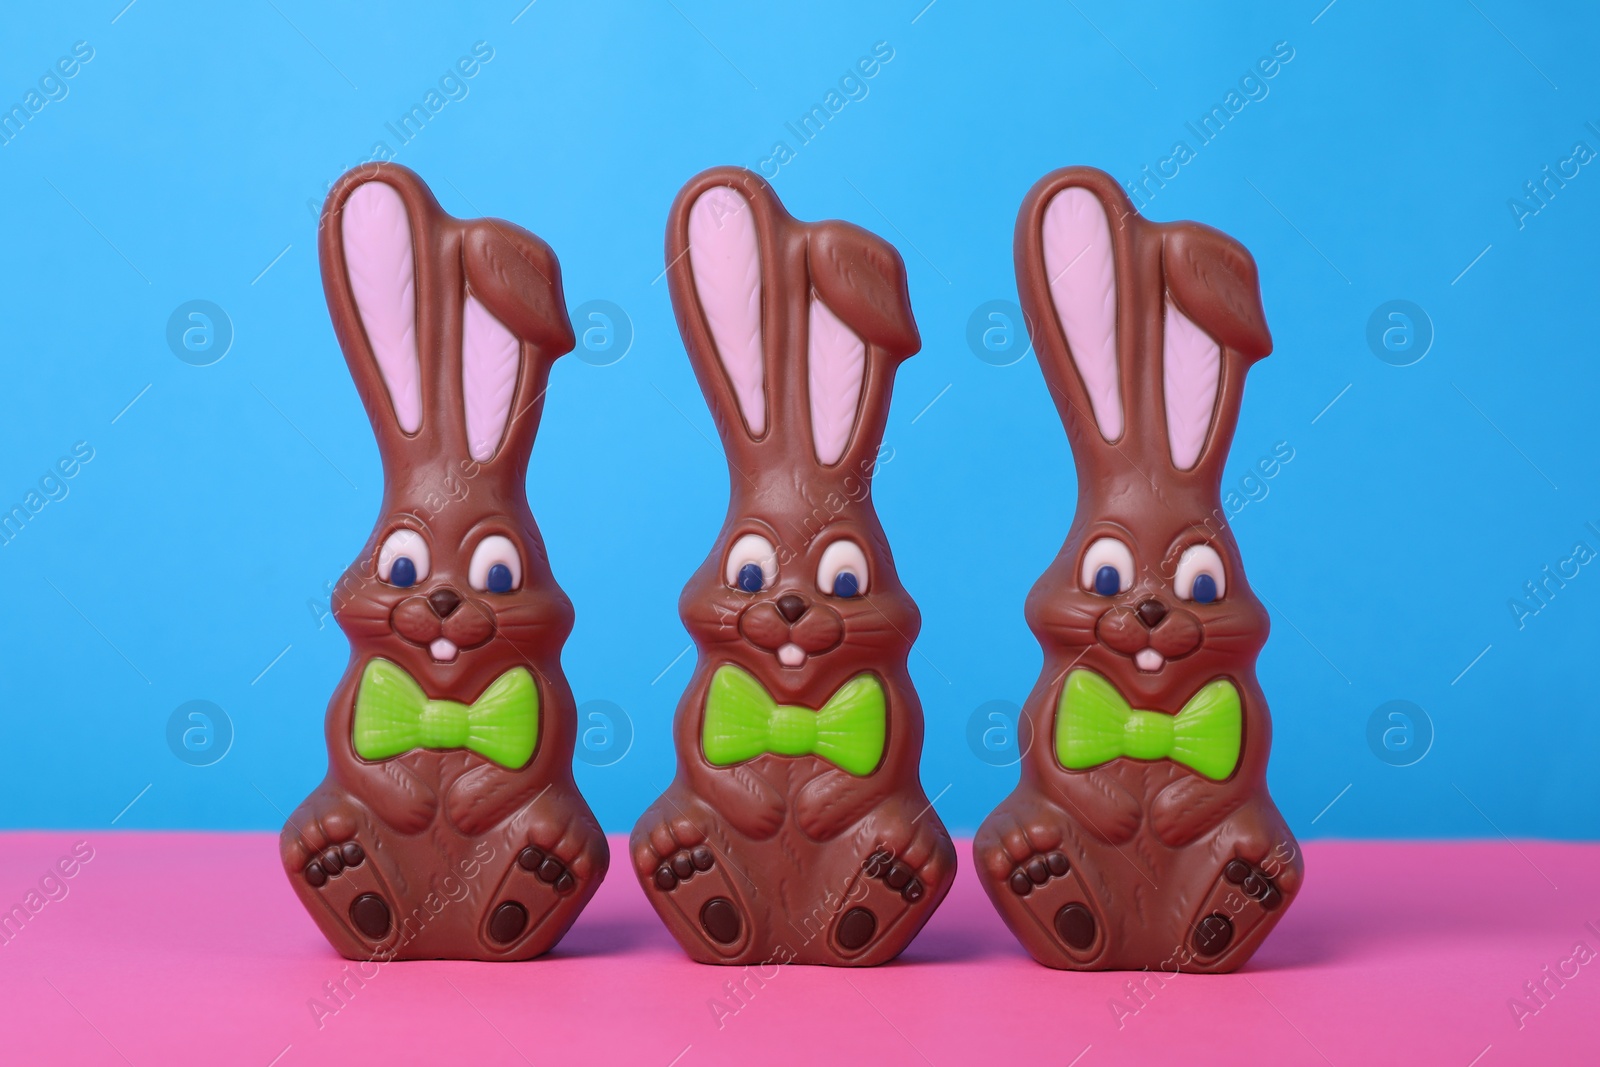 Photo of Chocolate Easter bunnies on pink table against light blue background